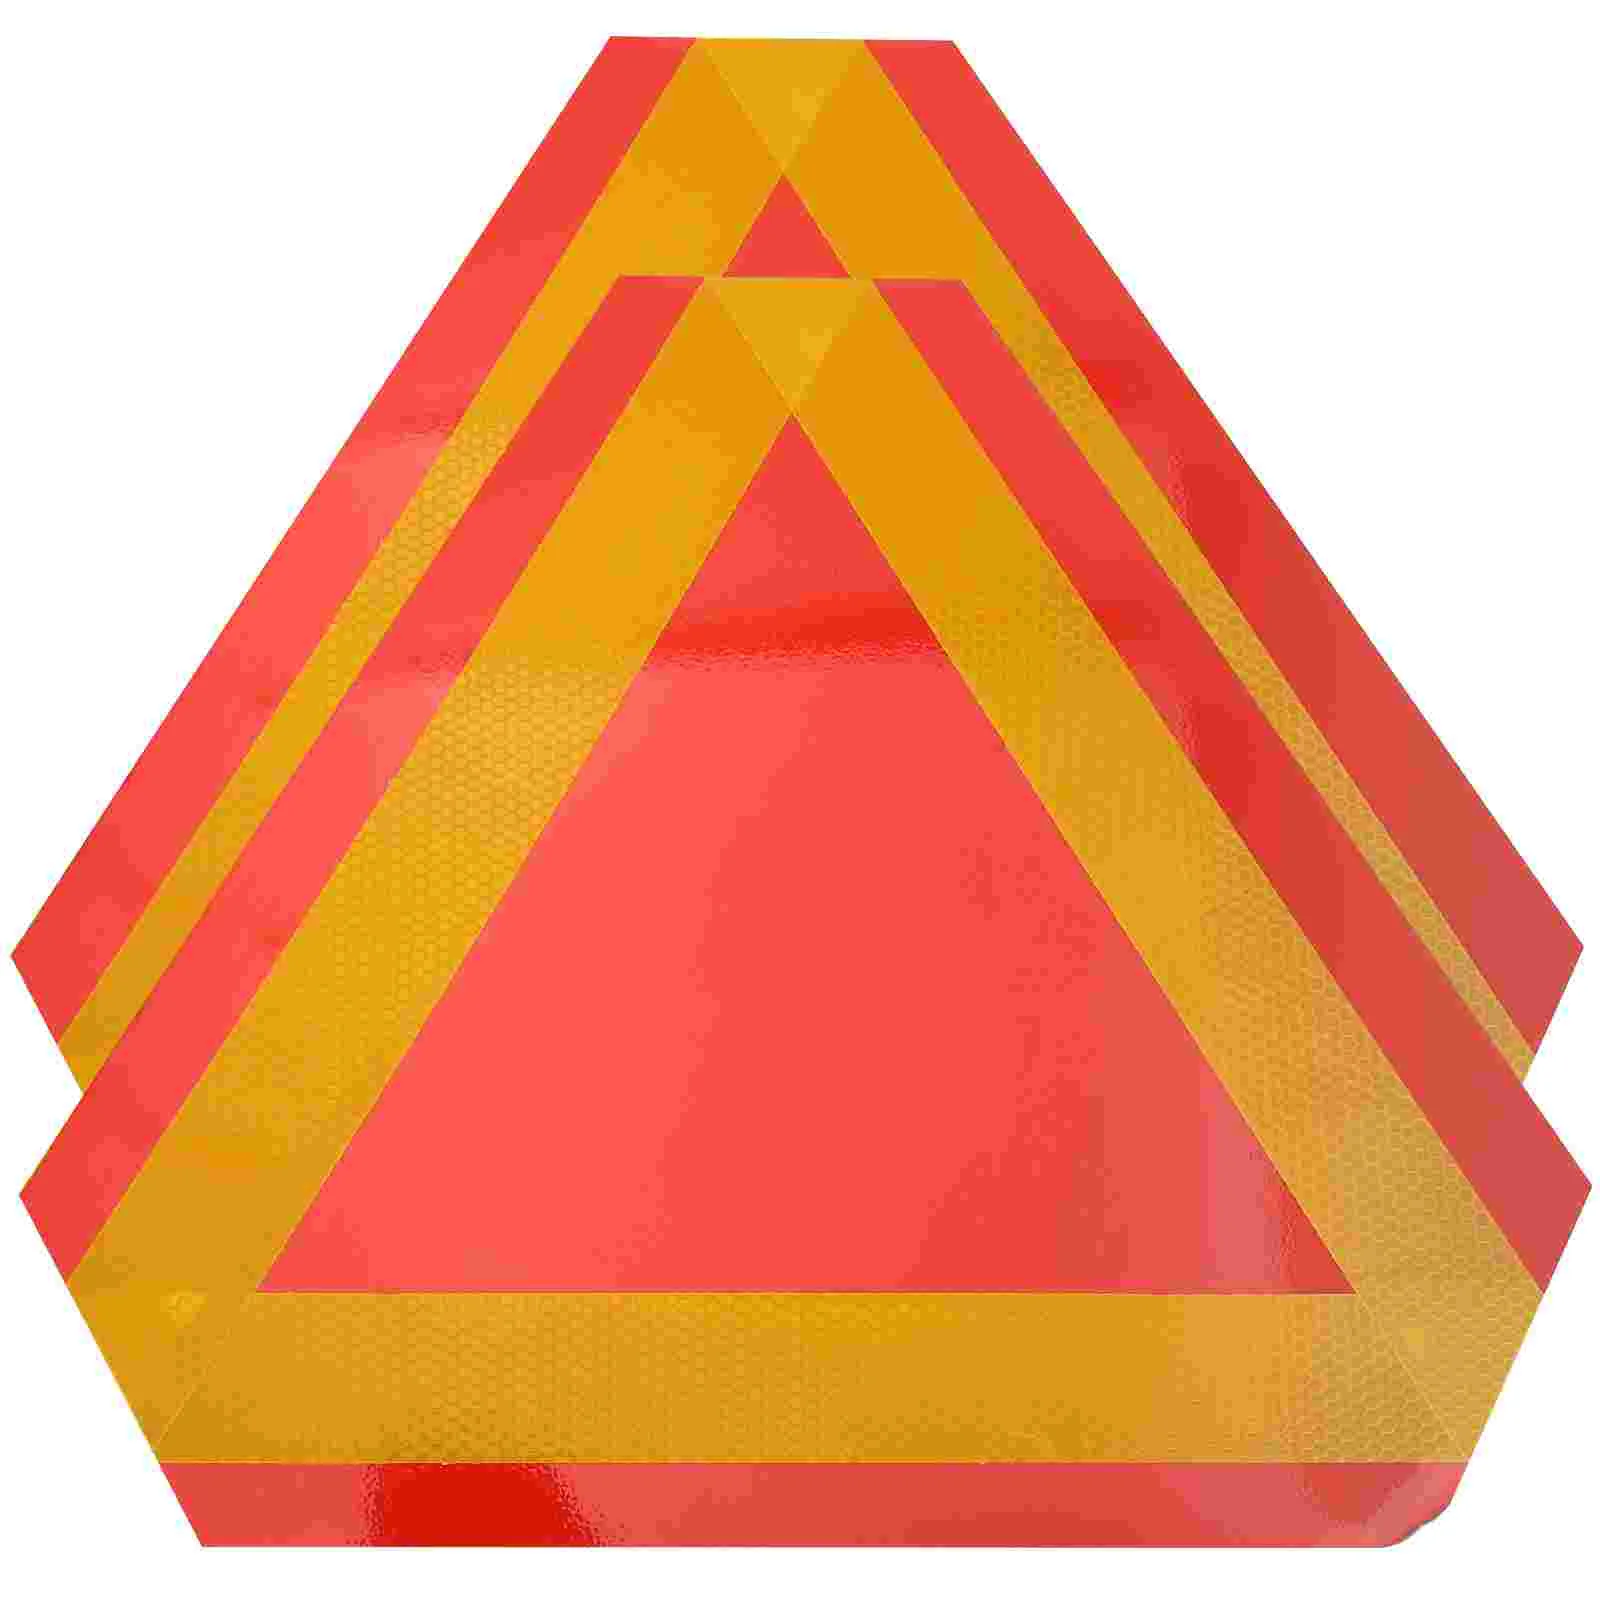 

Sign Triangle Warning Vehicle Slow Moving Safety Reflector Reflectors Car Roadside Triangles Reflective Cart Signs Accessories